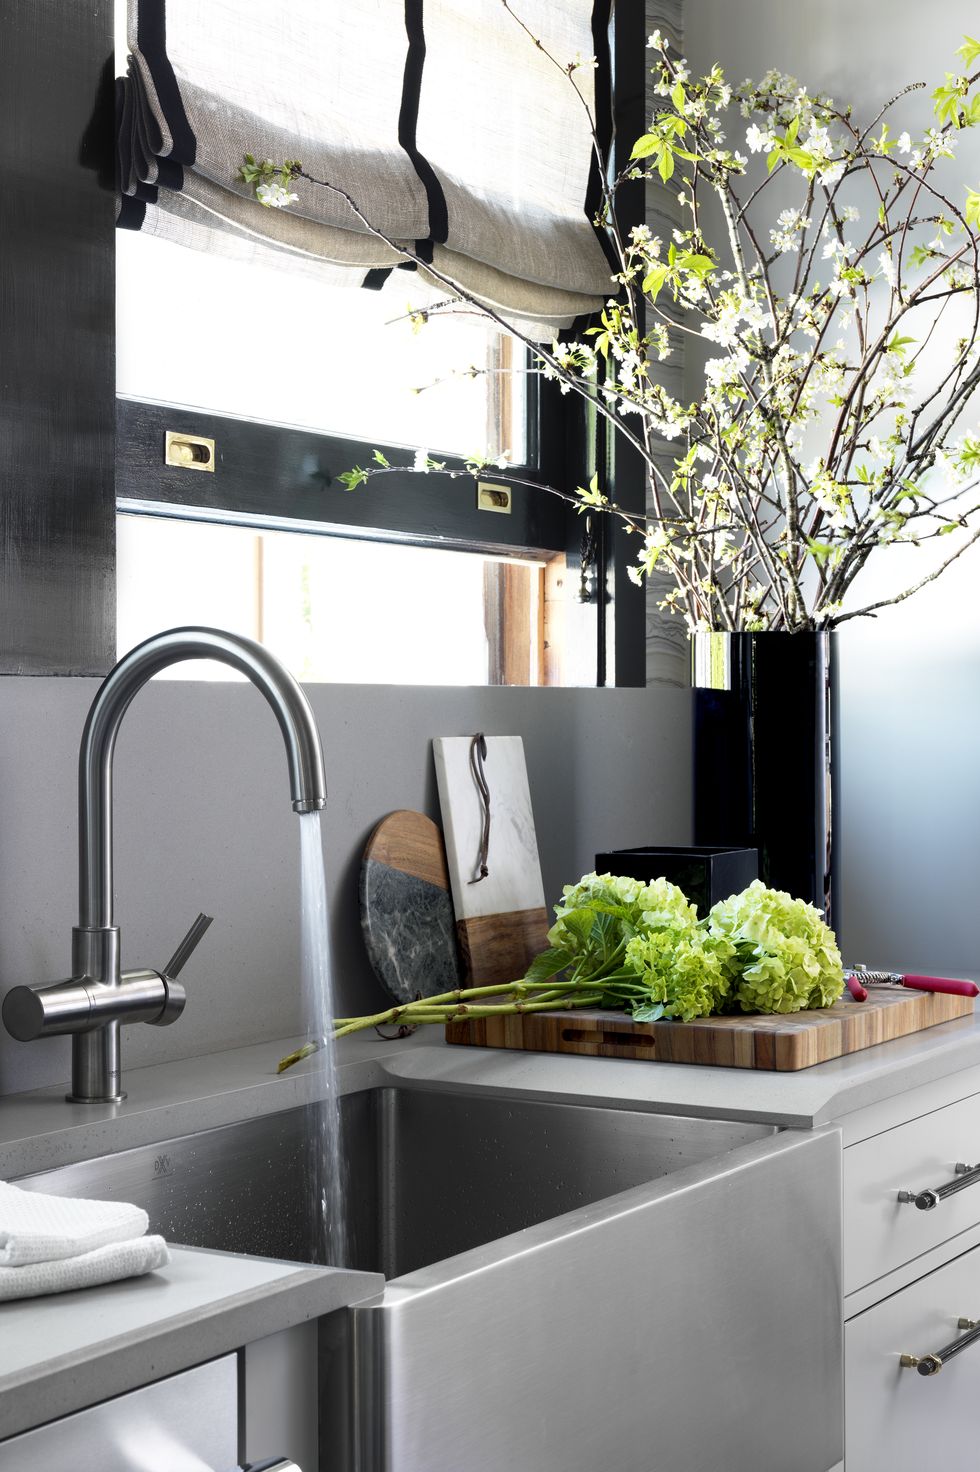 5 Heat-Resistant Countertop Materials to Make Your